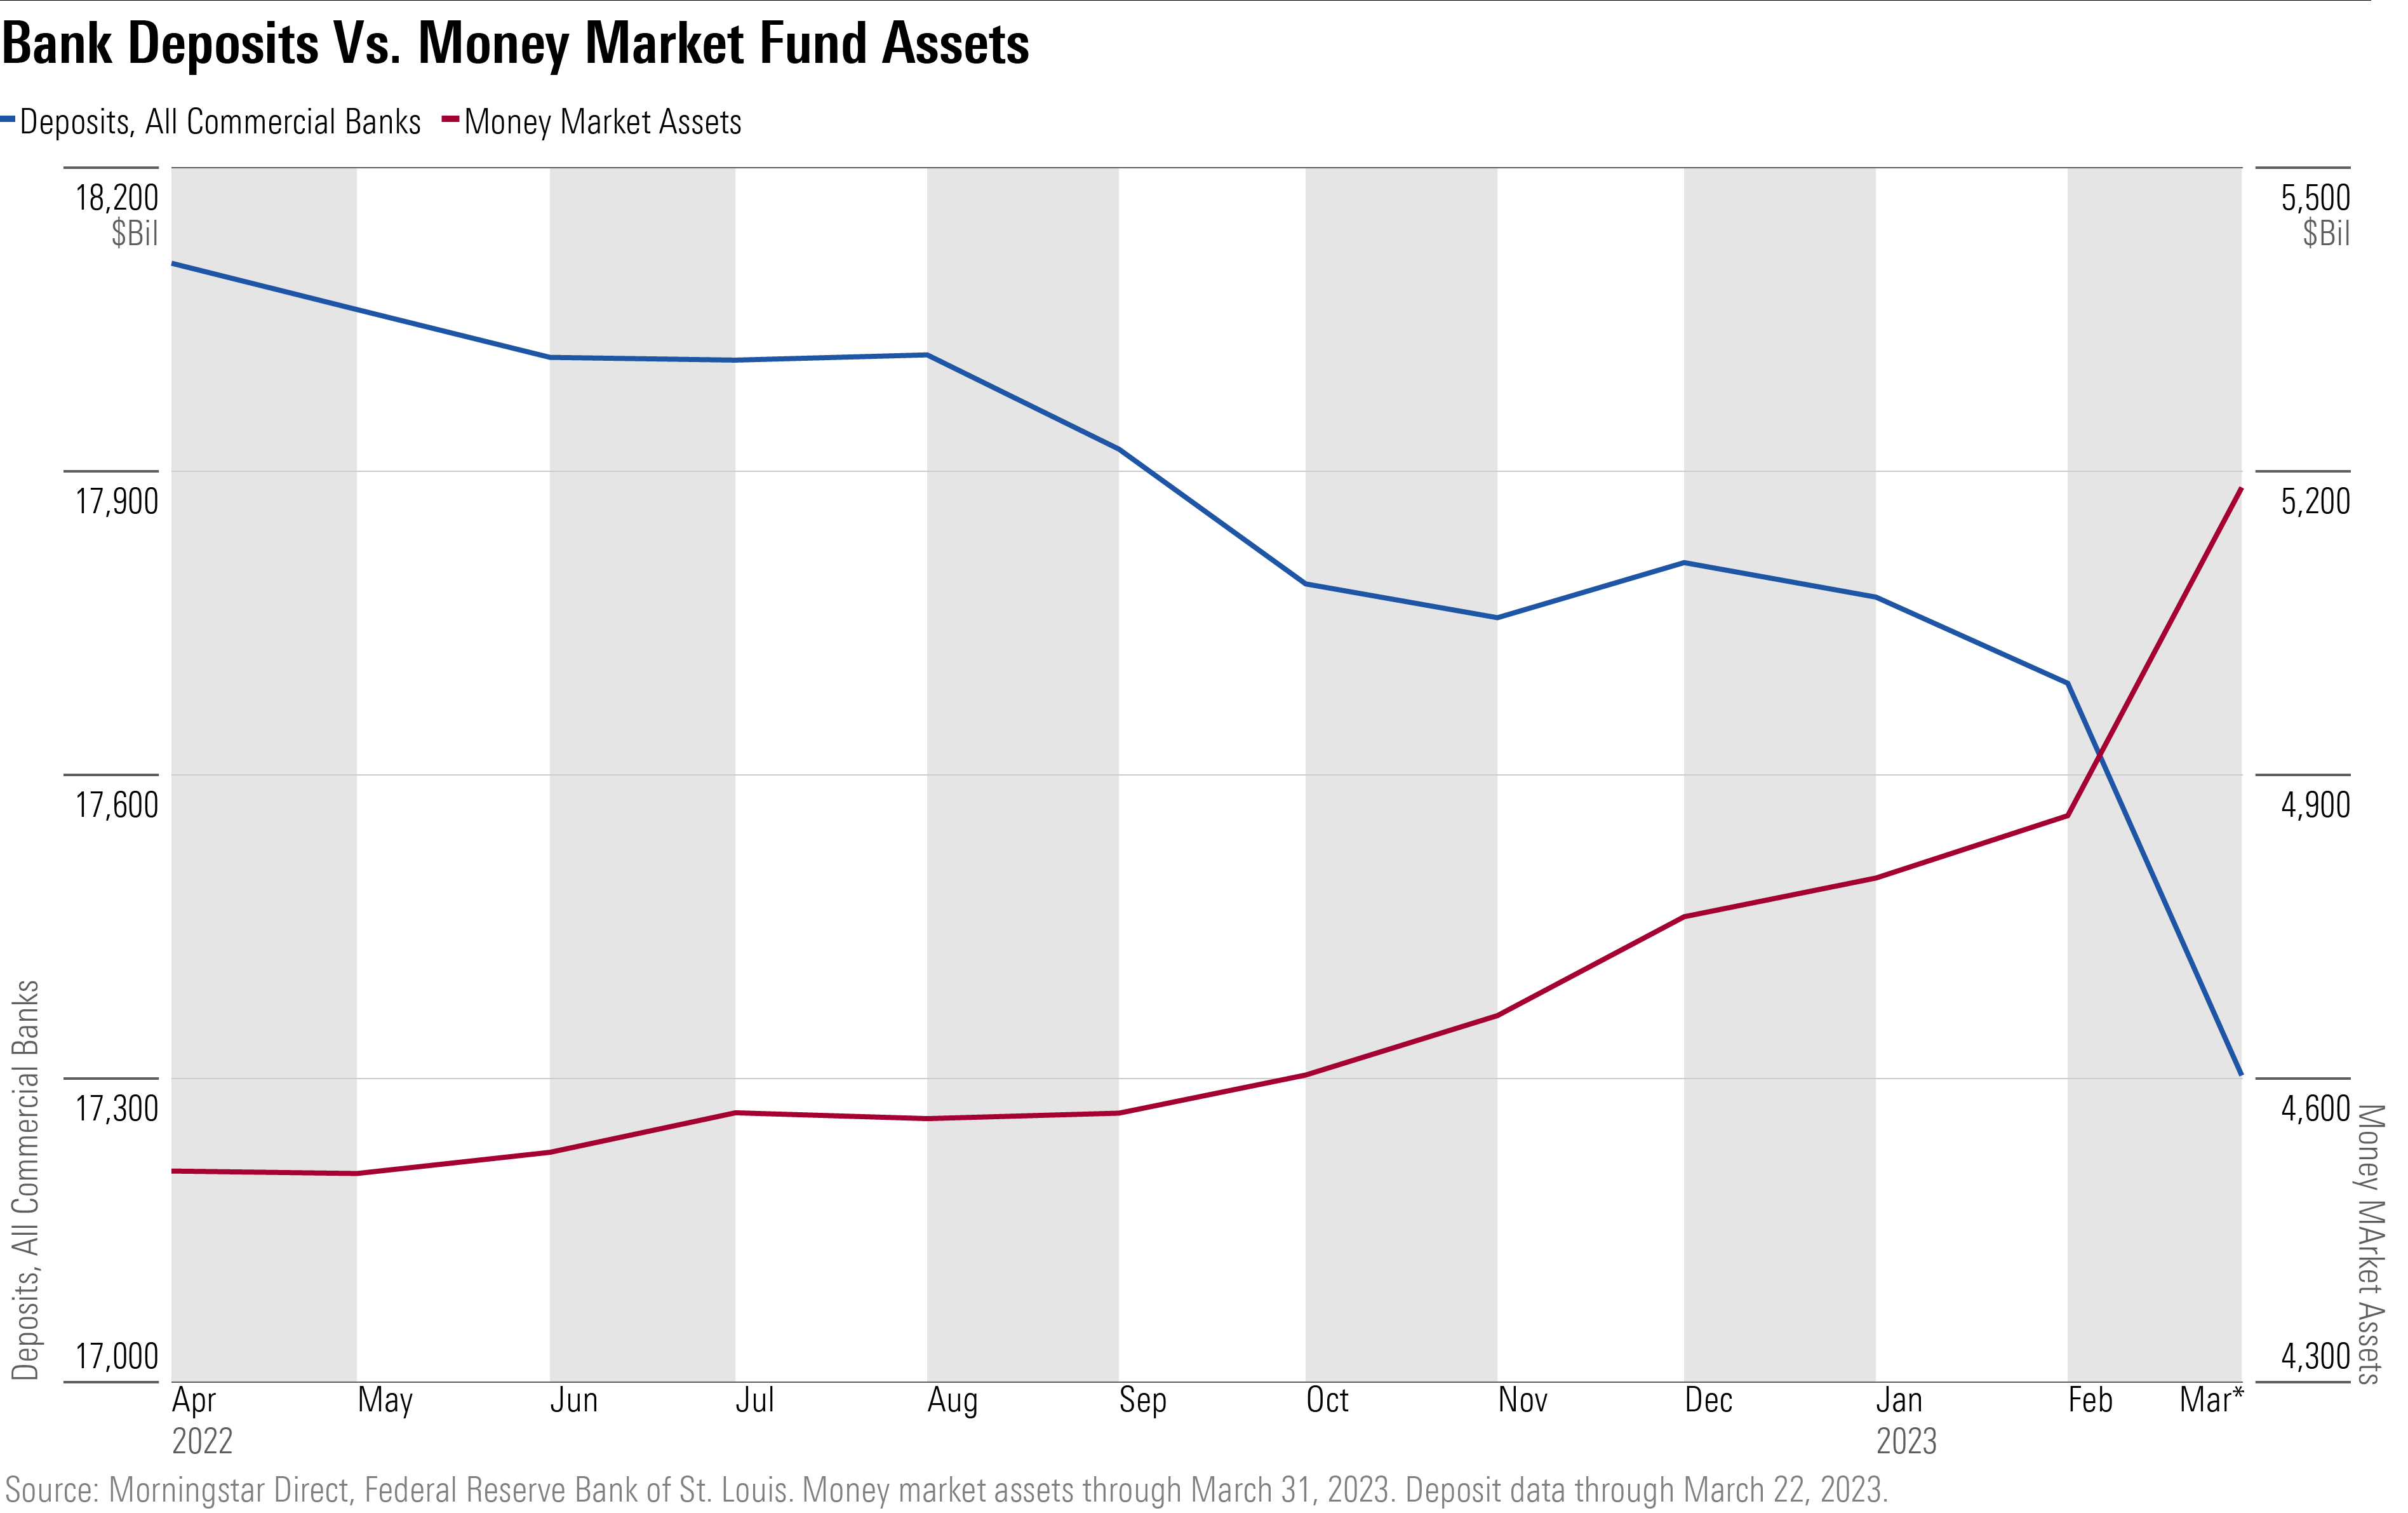 Investors Flood Money Market Funds in Search of Yield, Not Just Bank